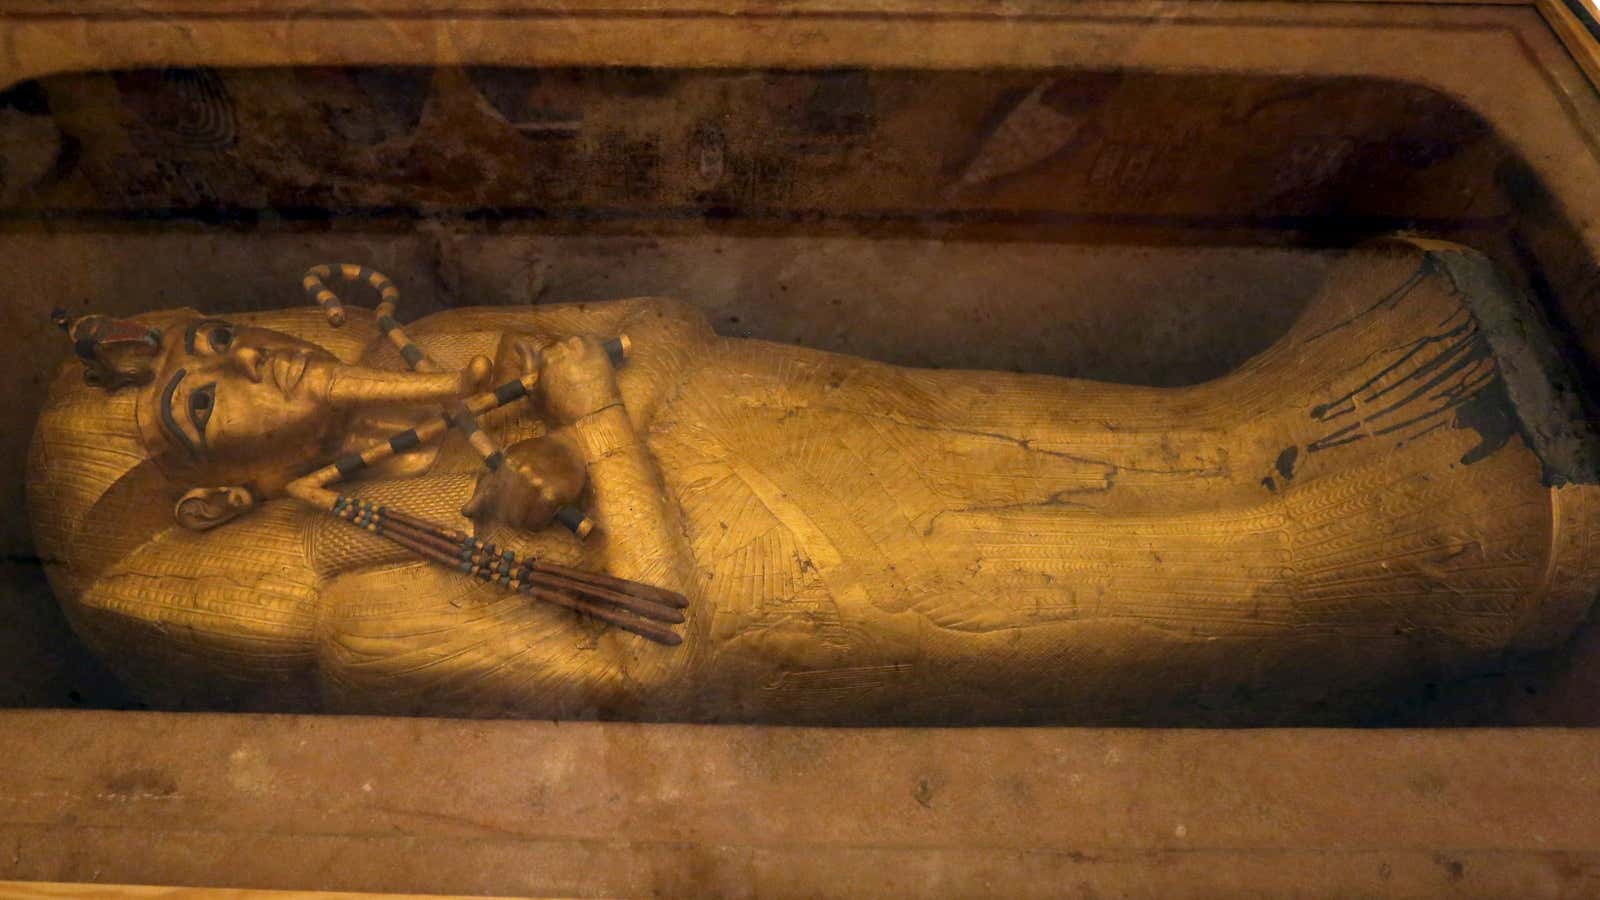 Tutankhamun could have been buried in a tomb meant for a queen.